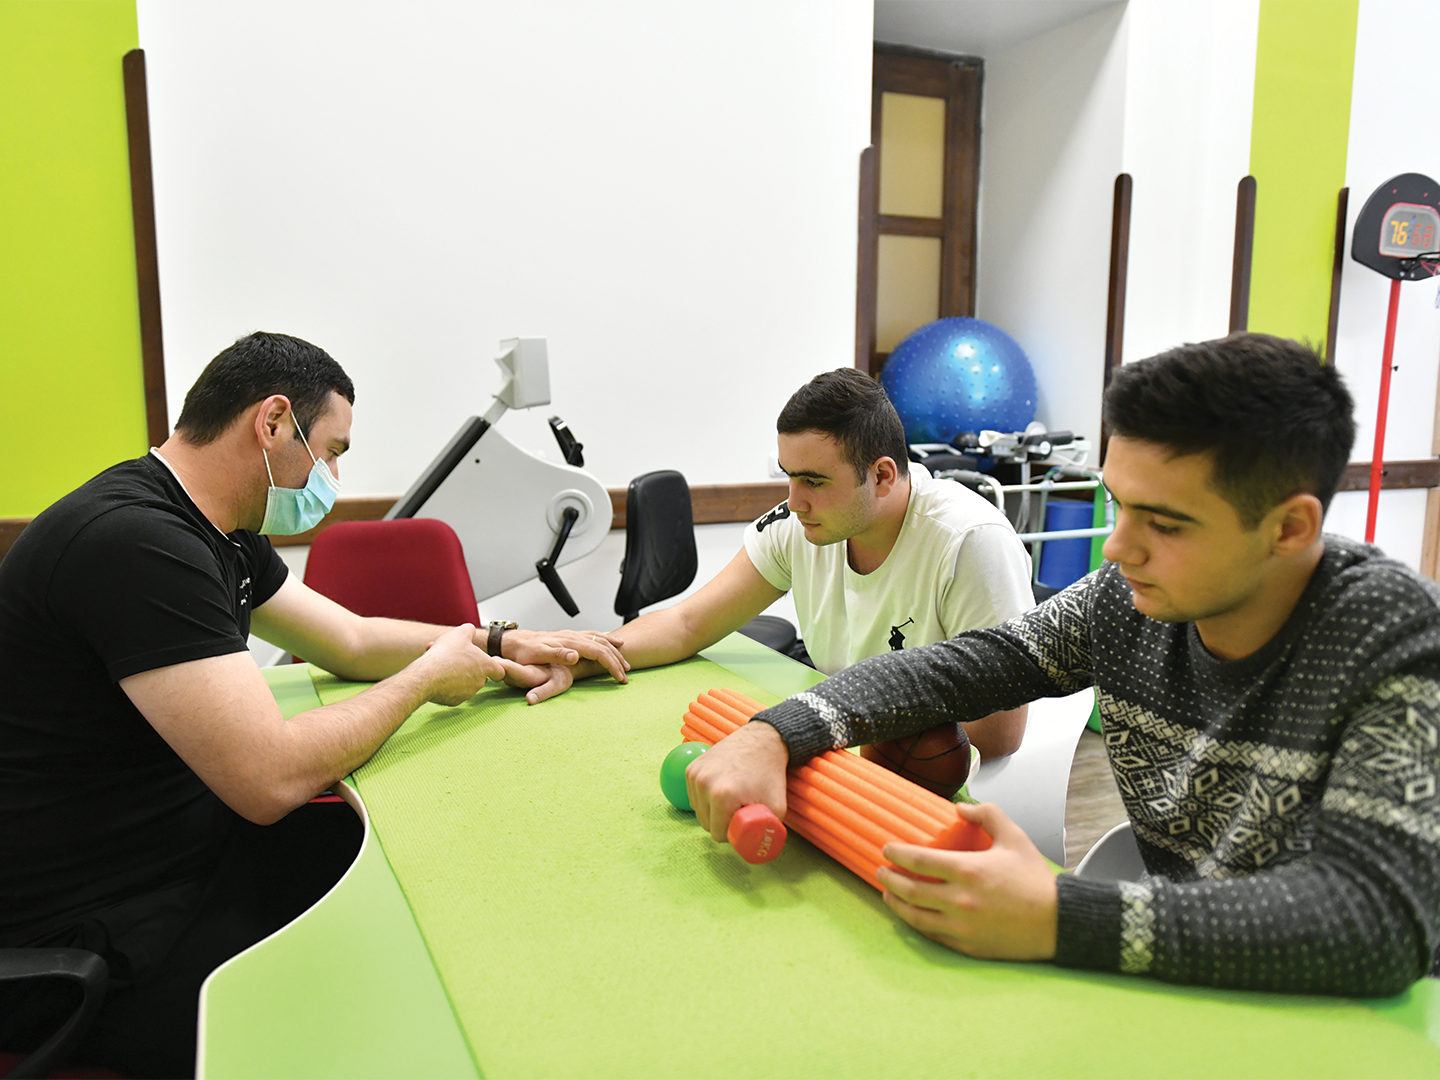 Artyom Arevikyan (middle) works to regain mobility back in his wrist that was injured by missile shrapnel.